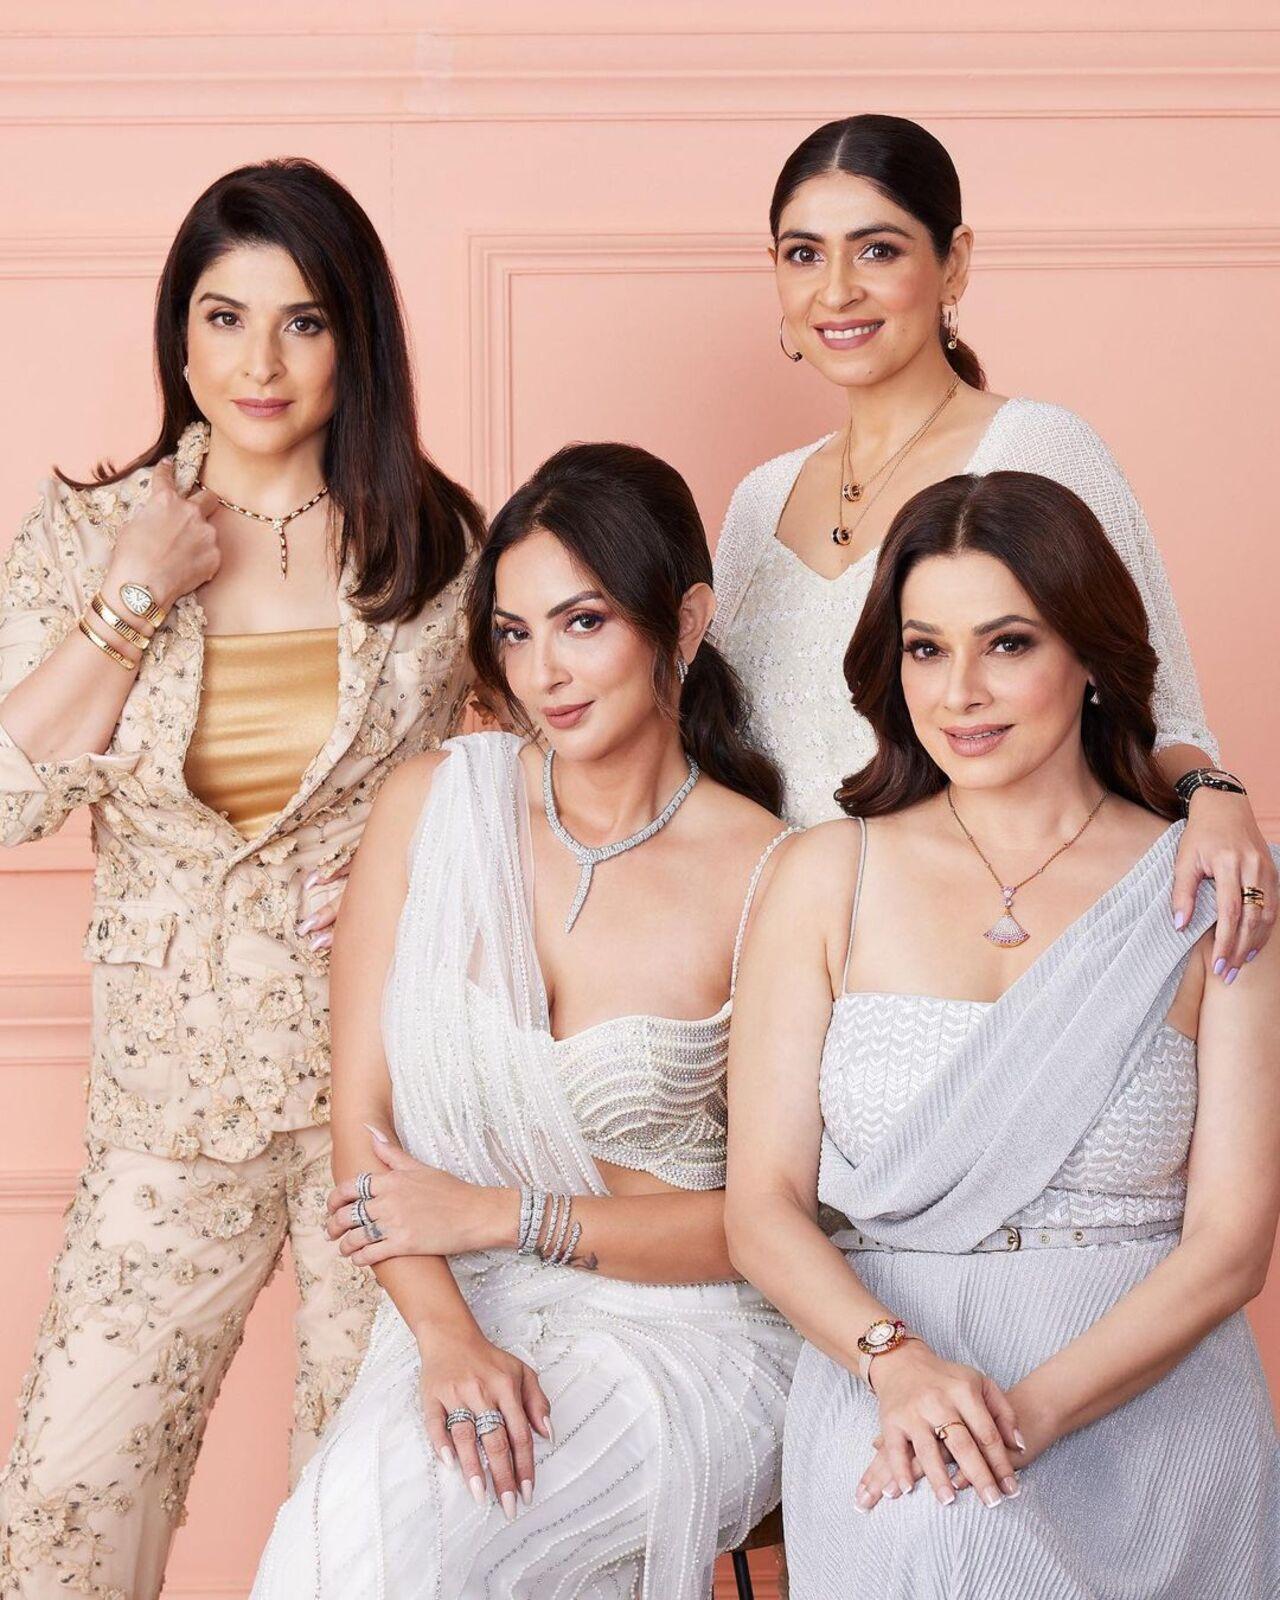 The four 'Bollywood Wives' star a strong, close bond with each other which dates back decades